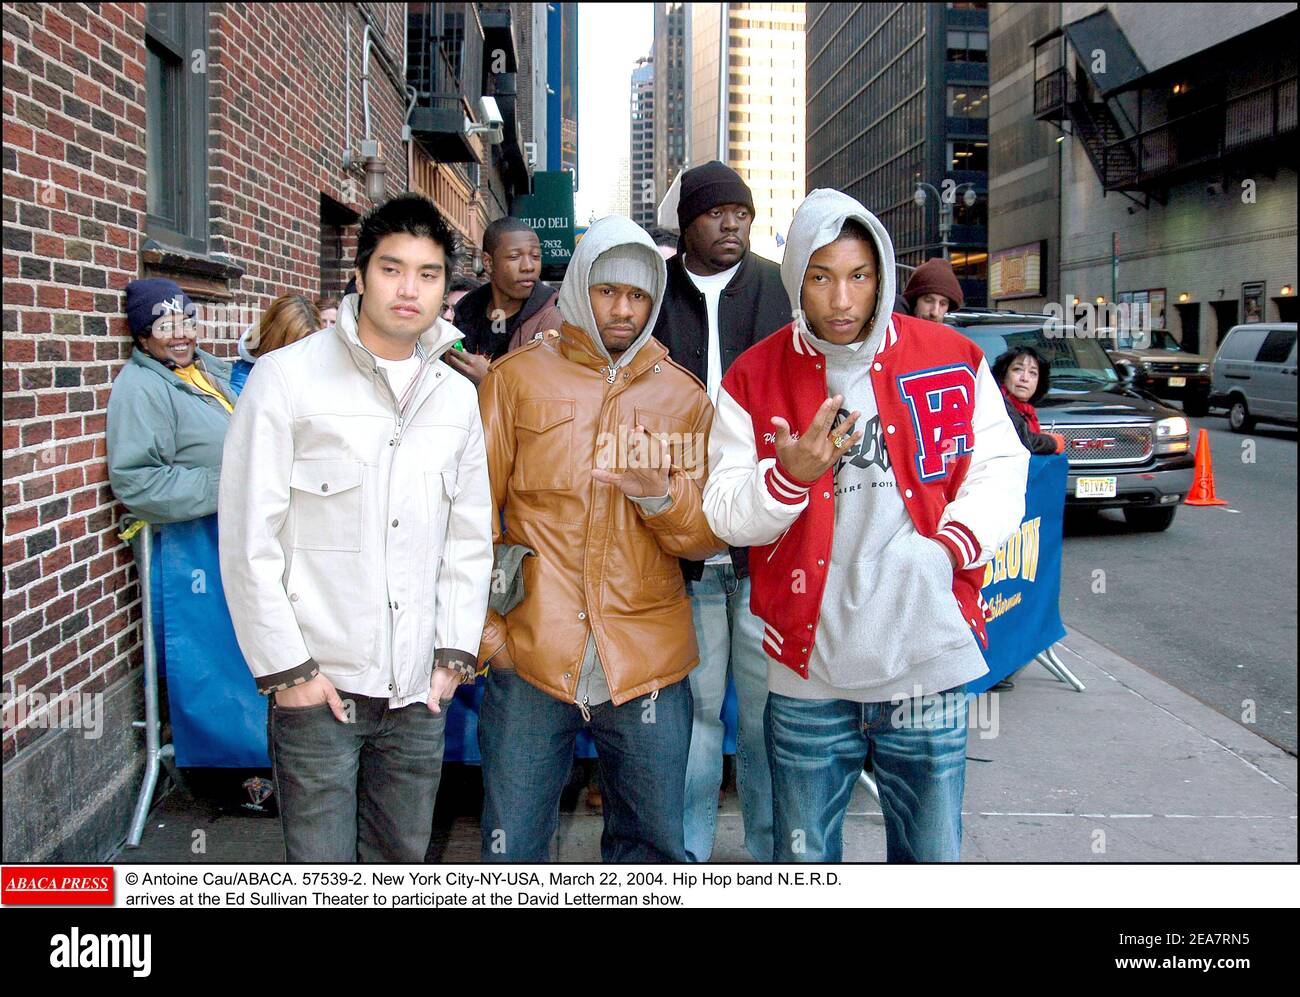 © Antoine Cau/ABACA. 57539-2. New York City-NY-USA, March 22, 2004. Hip Hop band N.E.R.D. arrives at the Ed Sullivan Theater to participate at the David Letterman show. Stock Photo